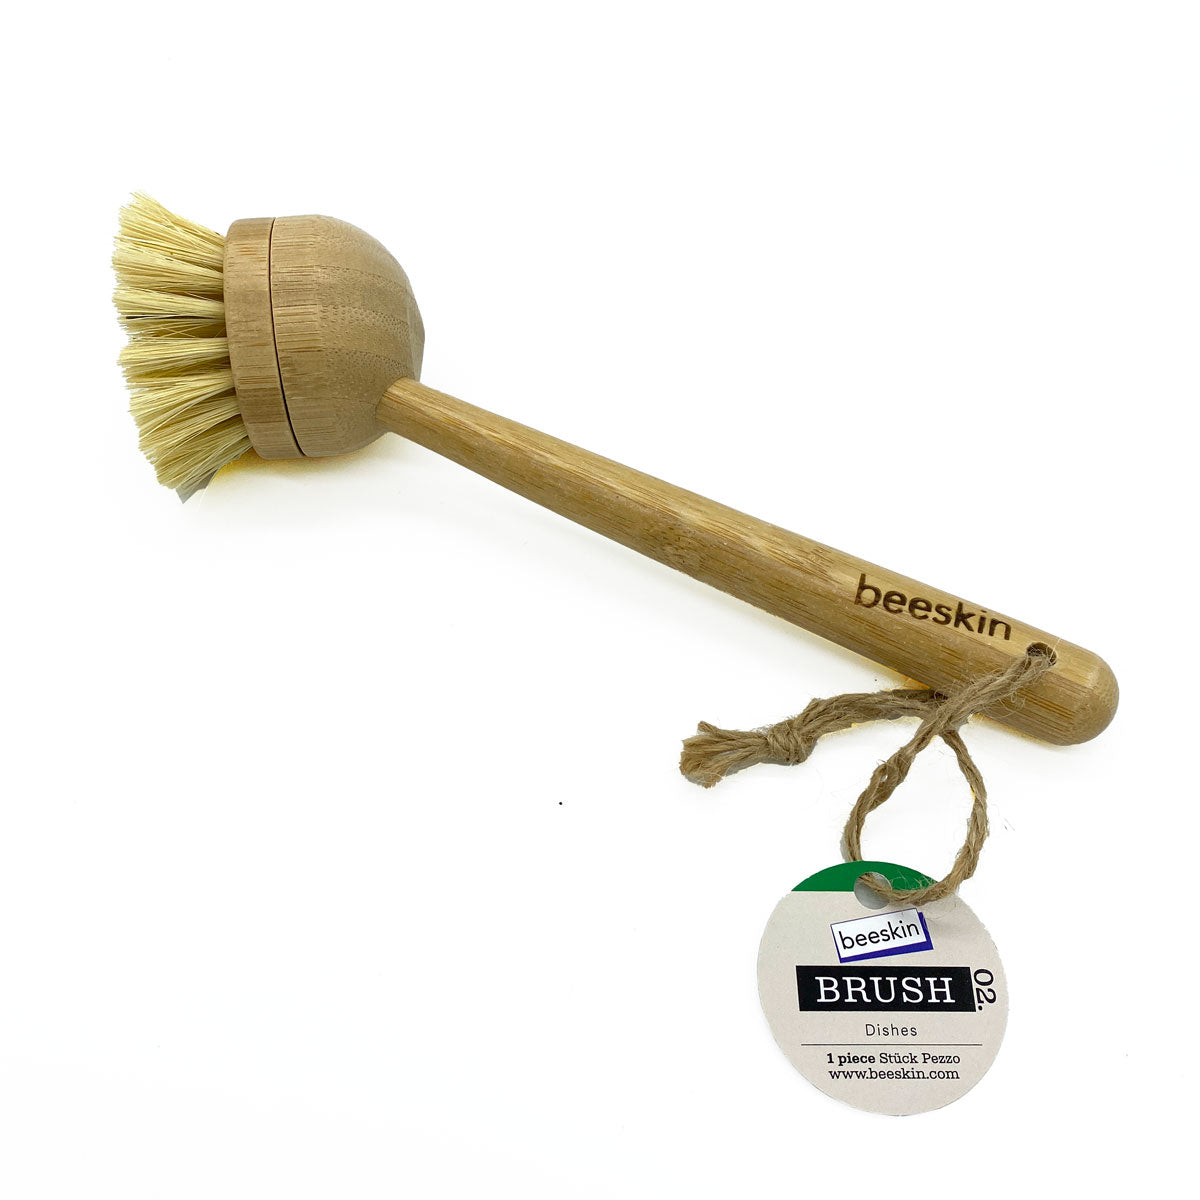 beeskin brush for dishes made of wood with a hanging tag